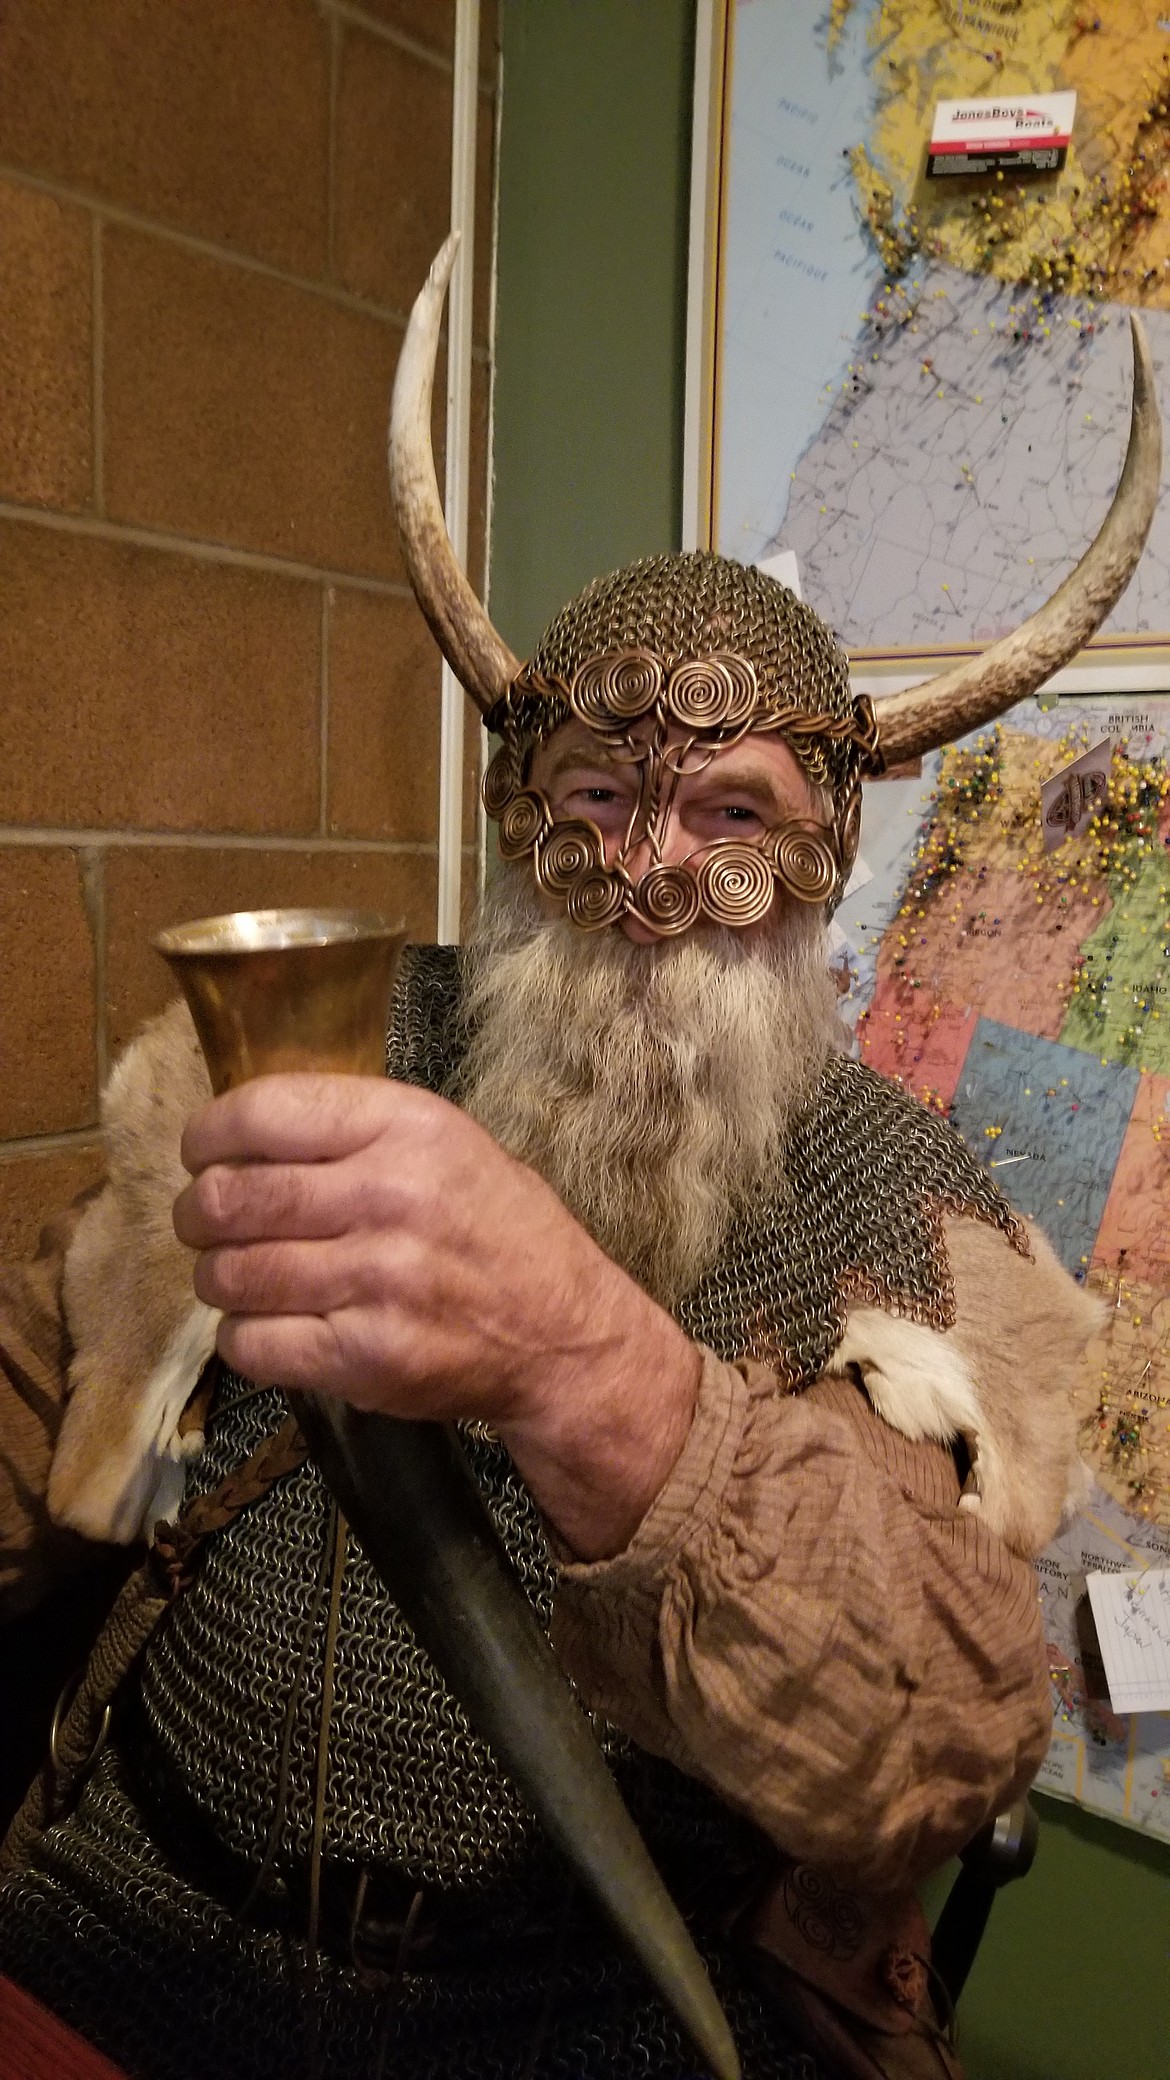 Elsewhere on Halloween, a Viking was spotted at Mugsy&#146;s Tavern and Grill.

Photos by MANDI BATEMAN